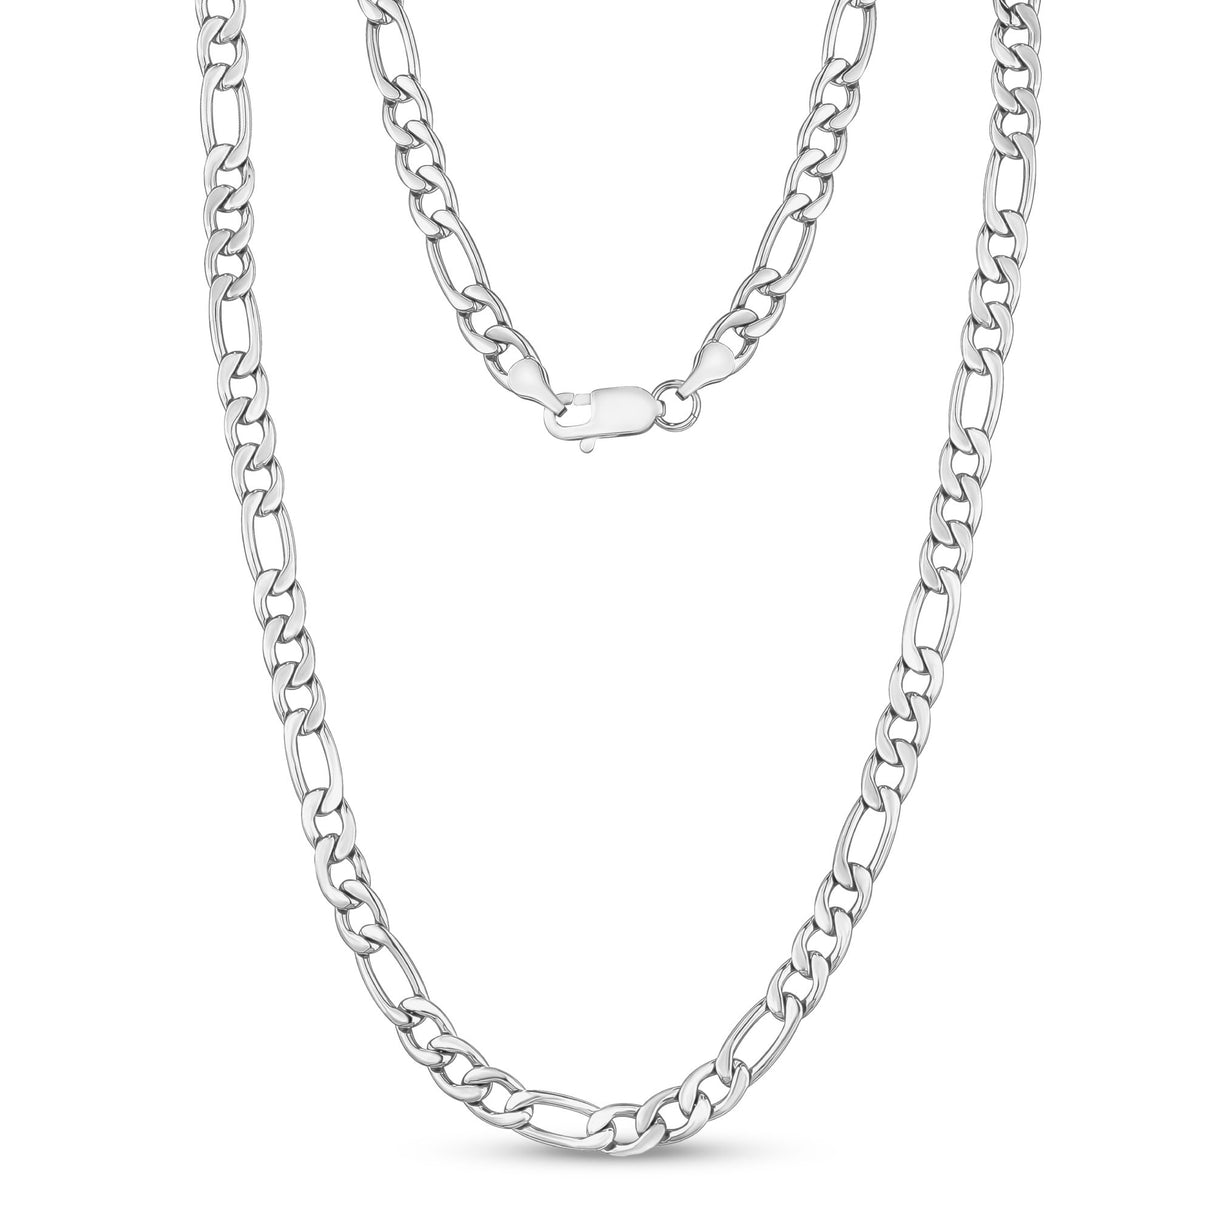 Men Necklace - 7mm Stainless Steel Figaro Link Chain Necklace